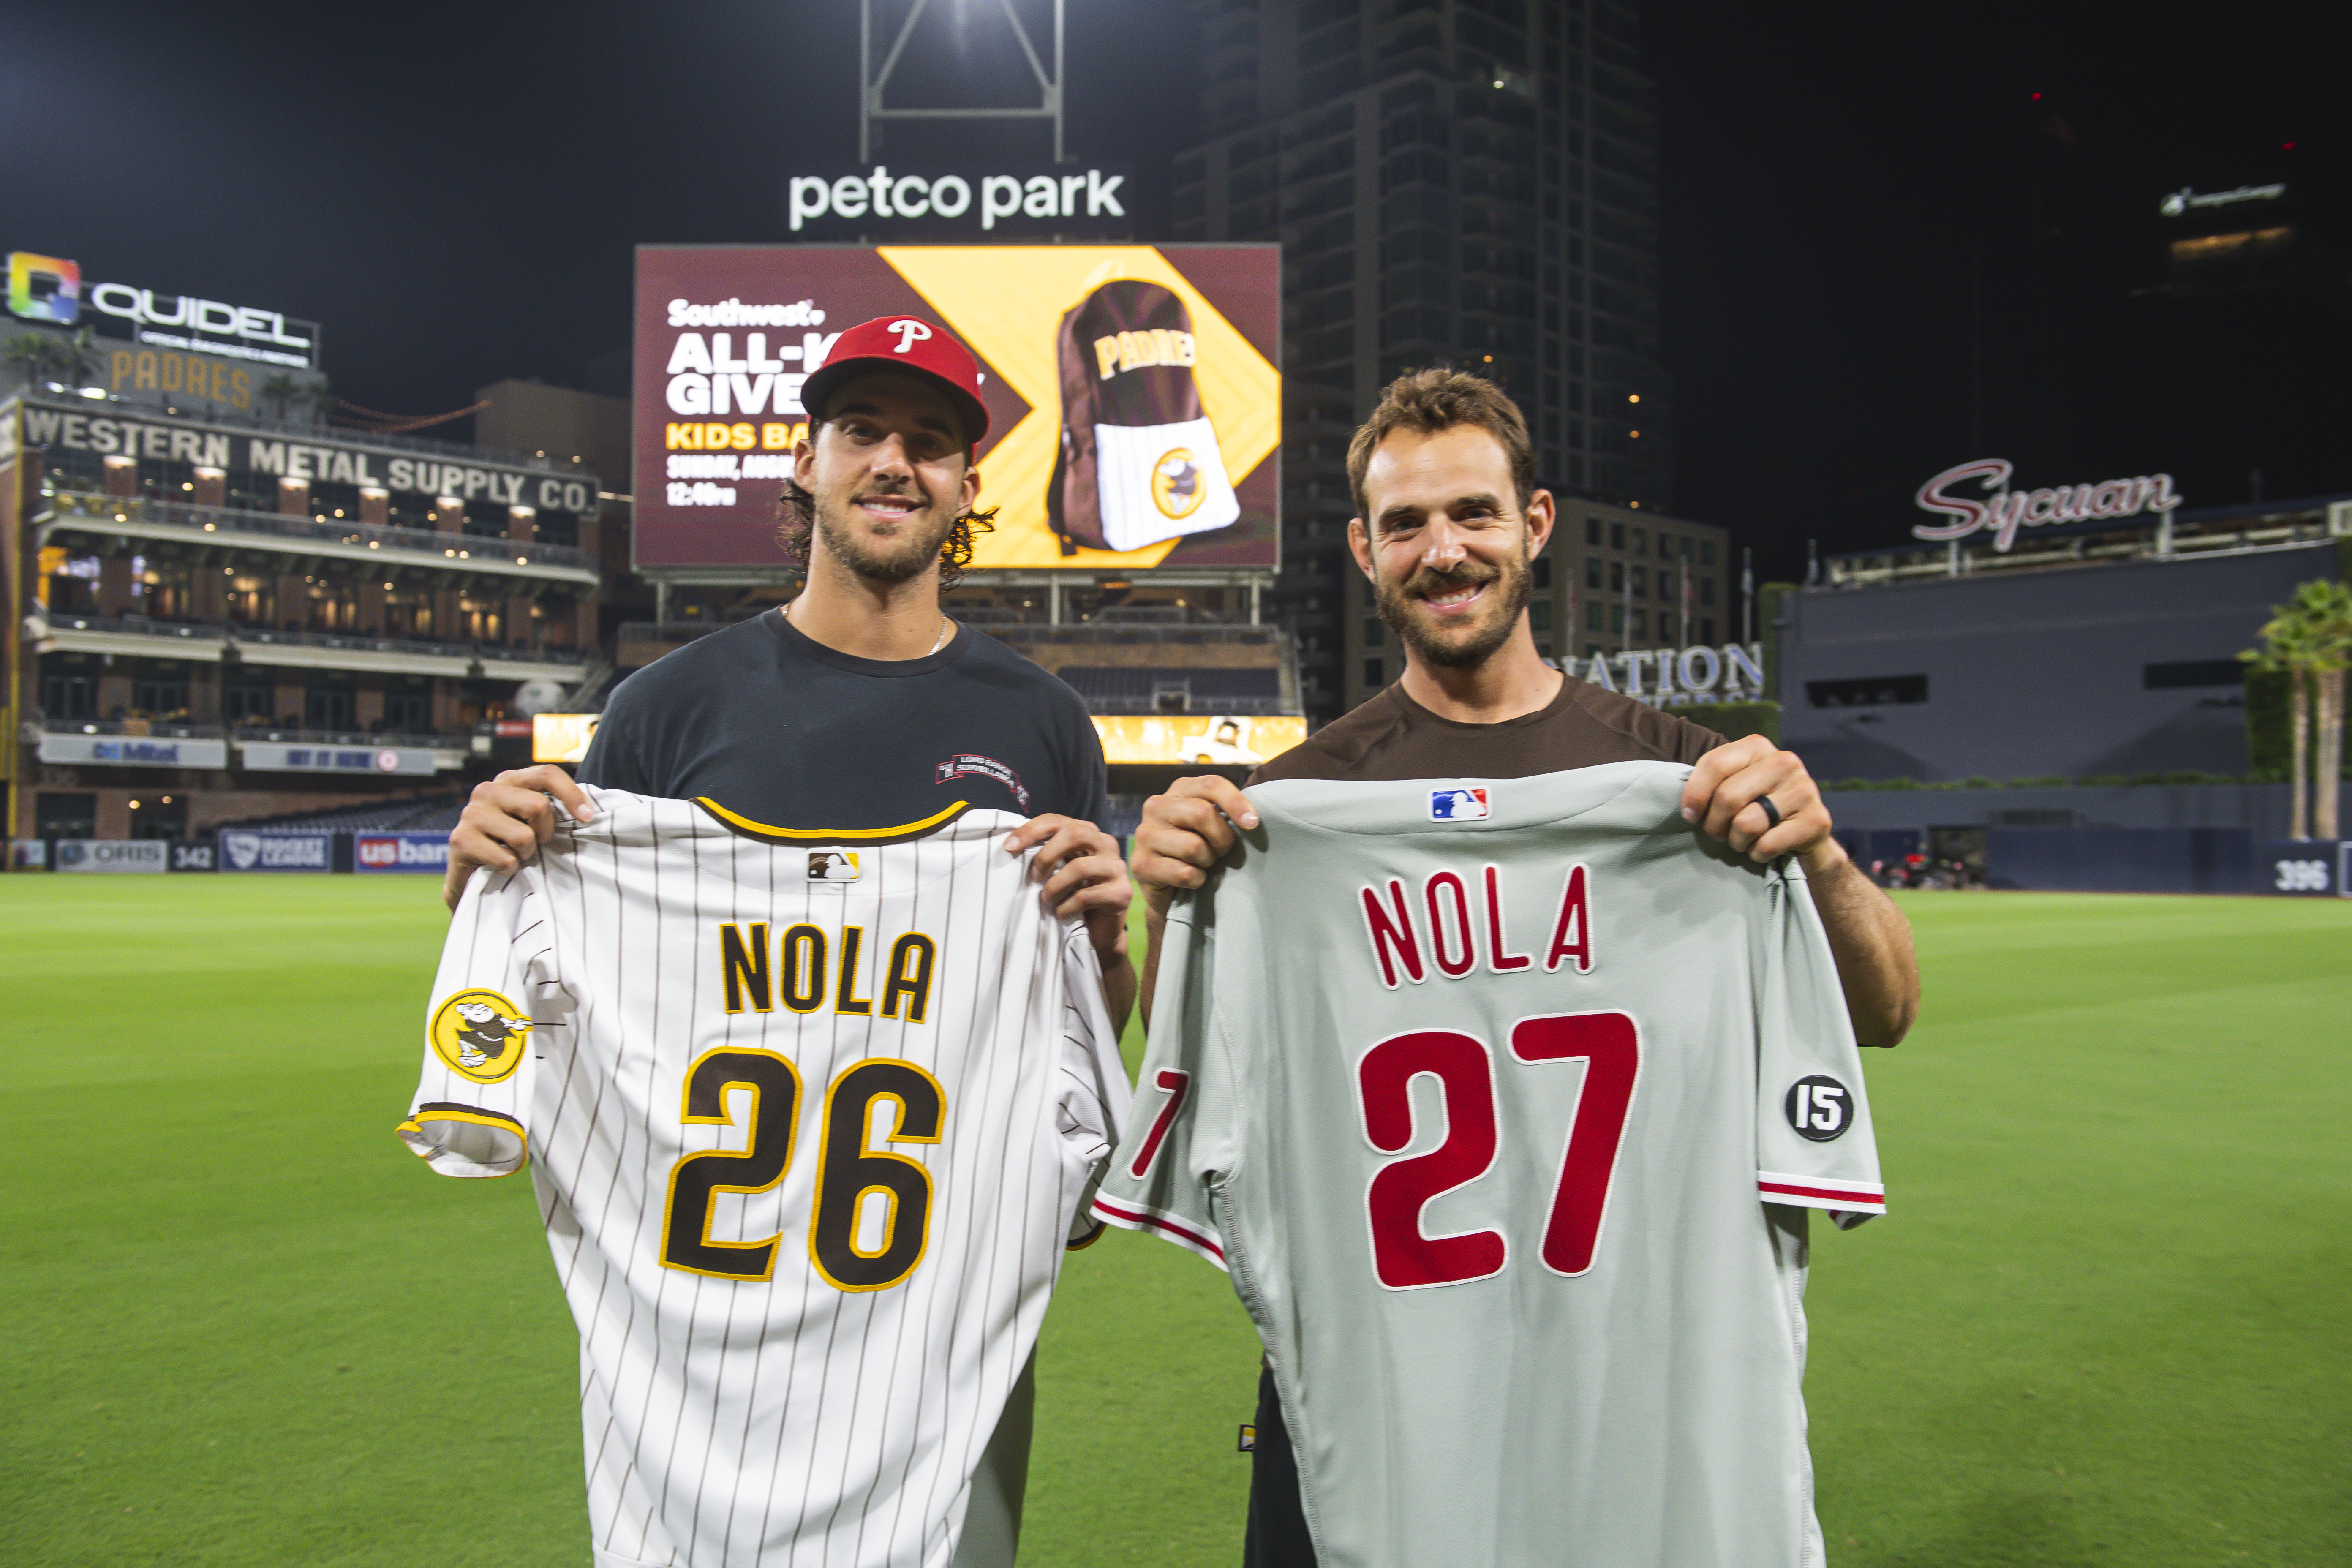 Brotherly love? Not so much between Nolas during NLCS